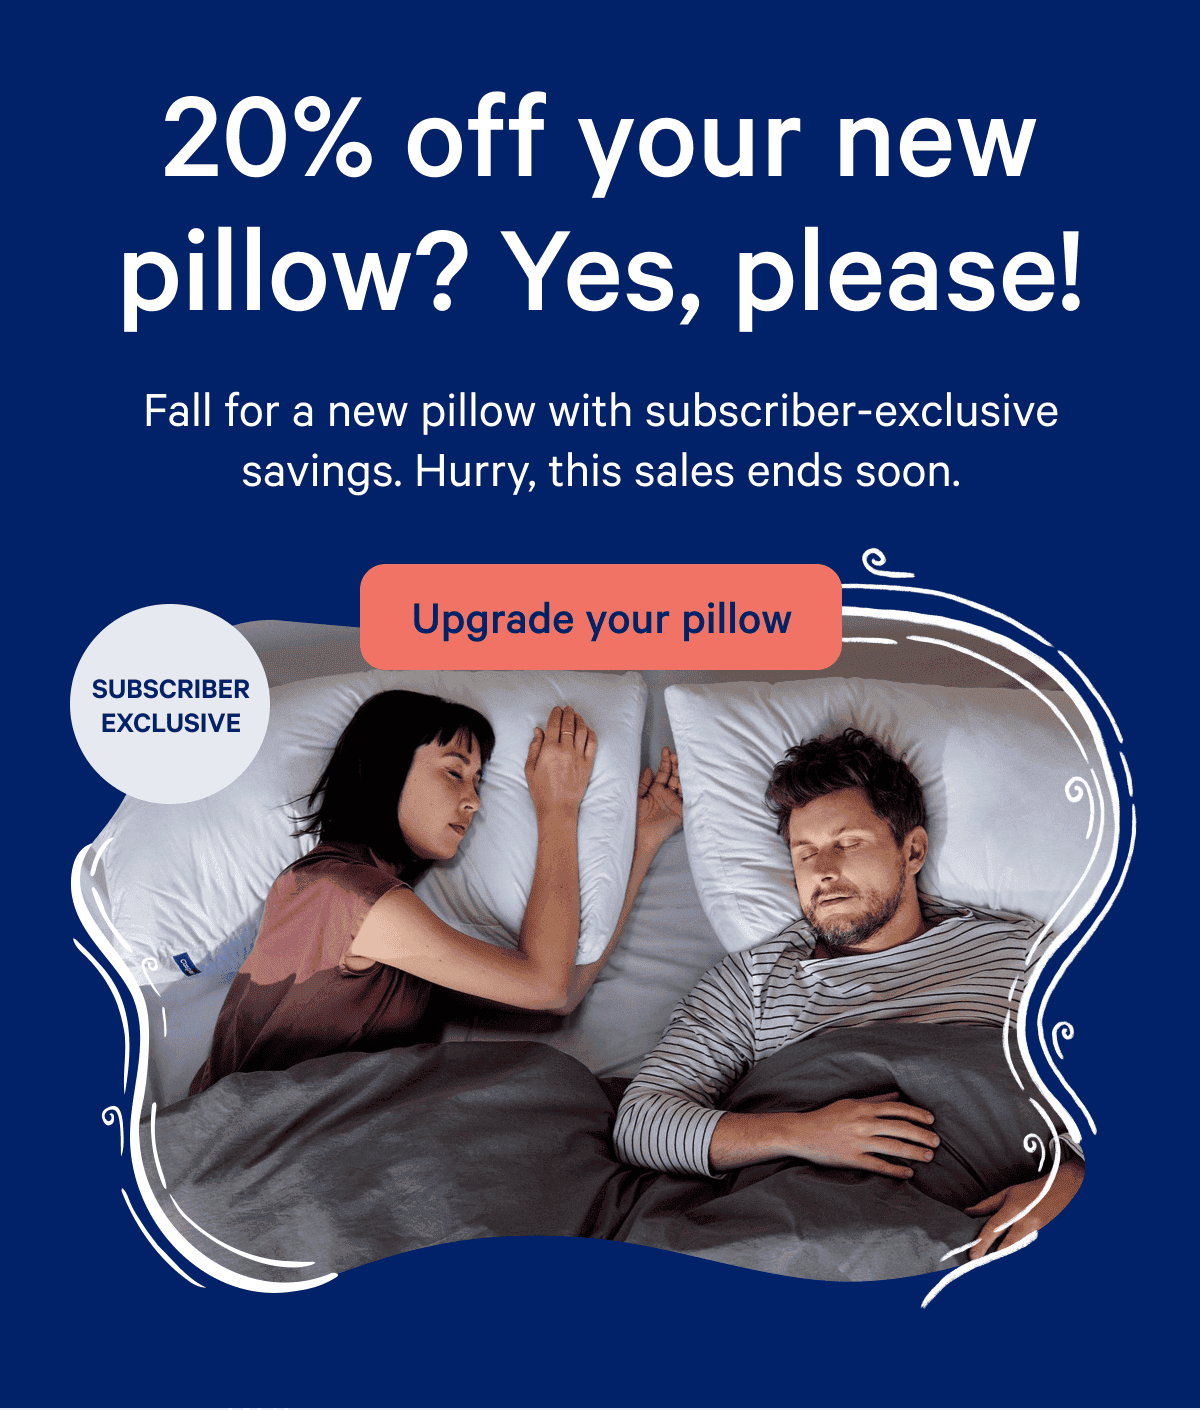 20% off your new pillow? Yes, please!